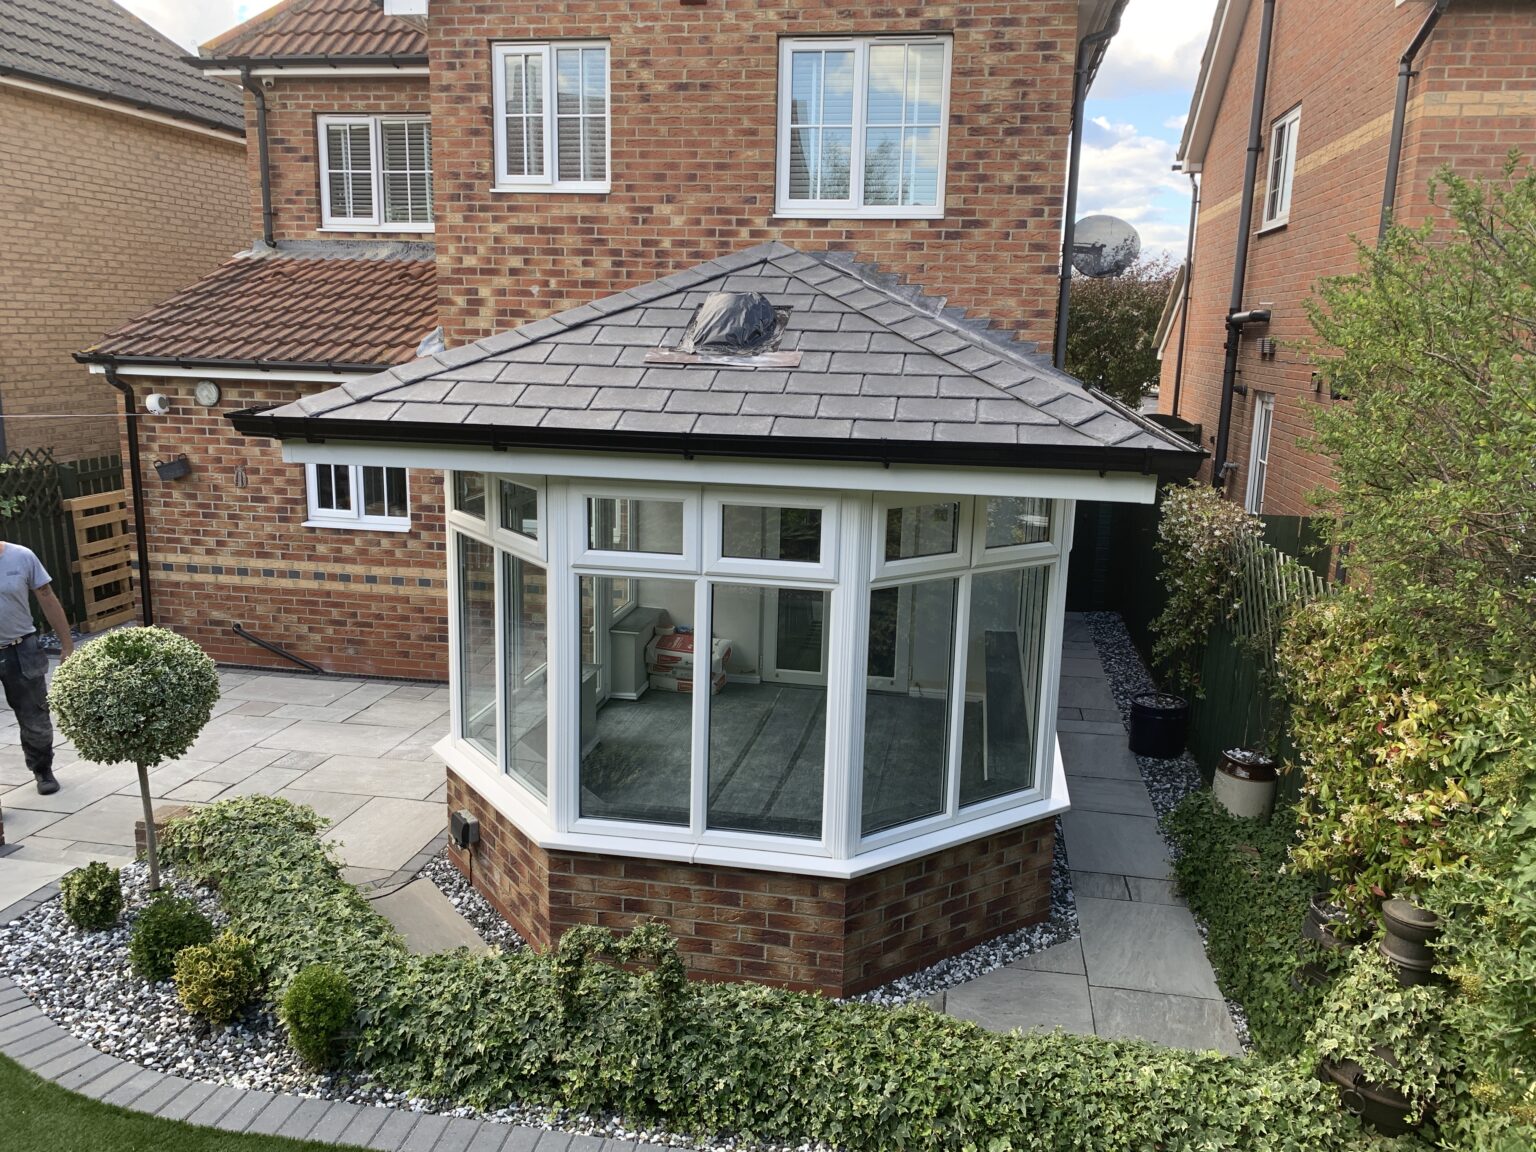 Insulated conservatory roofs are a game-changer, offering substantial benefits. They effectively regulate temperature all year round, enhancing comfort while reducing energy costs. Noise pollution decreases and your furniture is shielded from harmful UV rays. These roofs add a stylish aesthetic, raising your property's value. Don't wait to experience these improvements. Start your journey towards a more comfortable, efficient, and serene conservatory today. Upgrade your roof to an insulated one and feel the difference immediately. Your conservatory deserves the best - an upgrade to an insulated roof. Act now and transform your conservatory into the perfect living space you've always envisioned. Your dream conservatory is just one decision away!